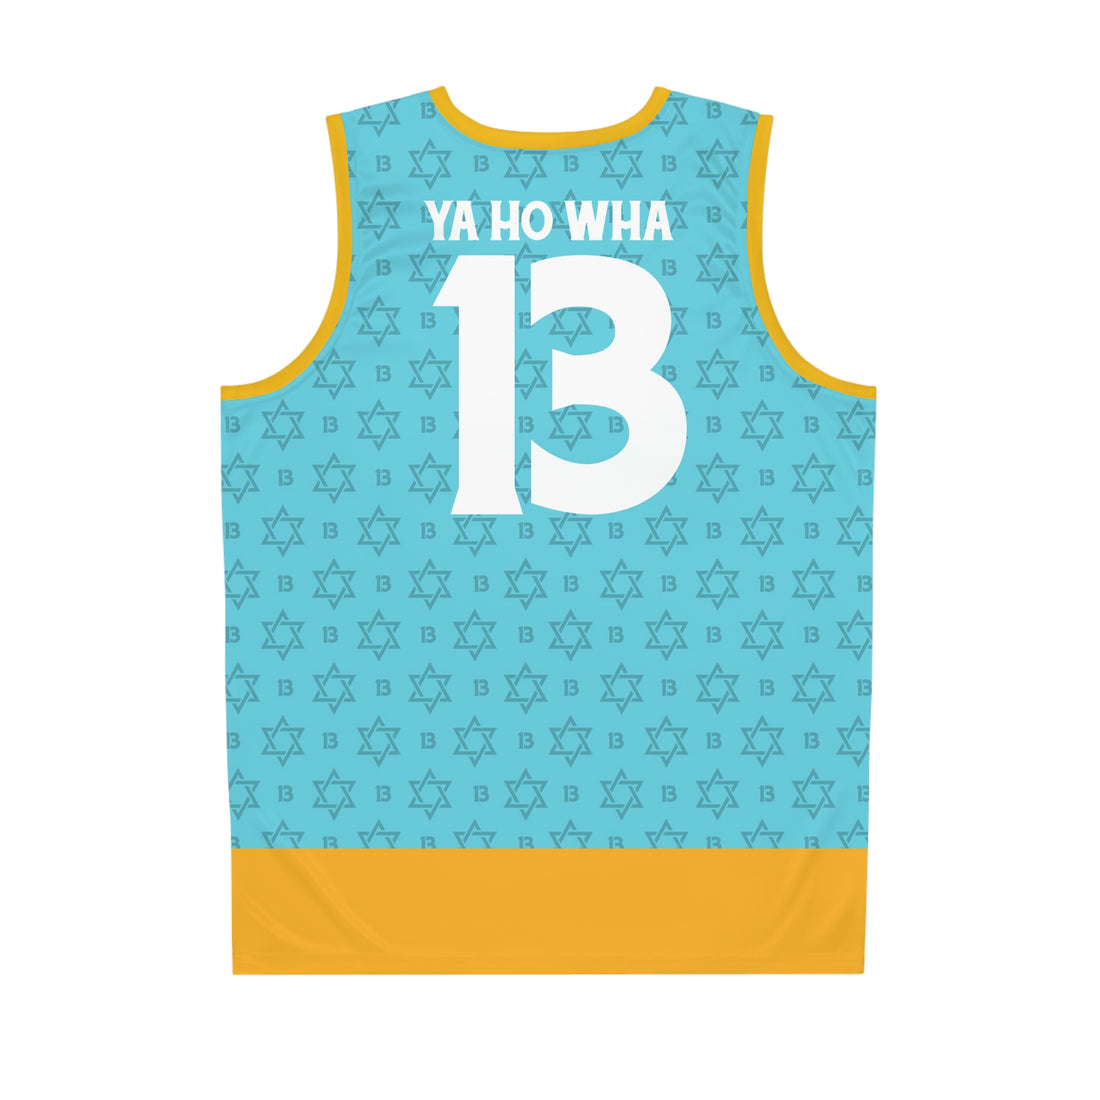 Father Yod's Team Teal Jersey